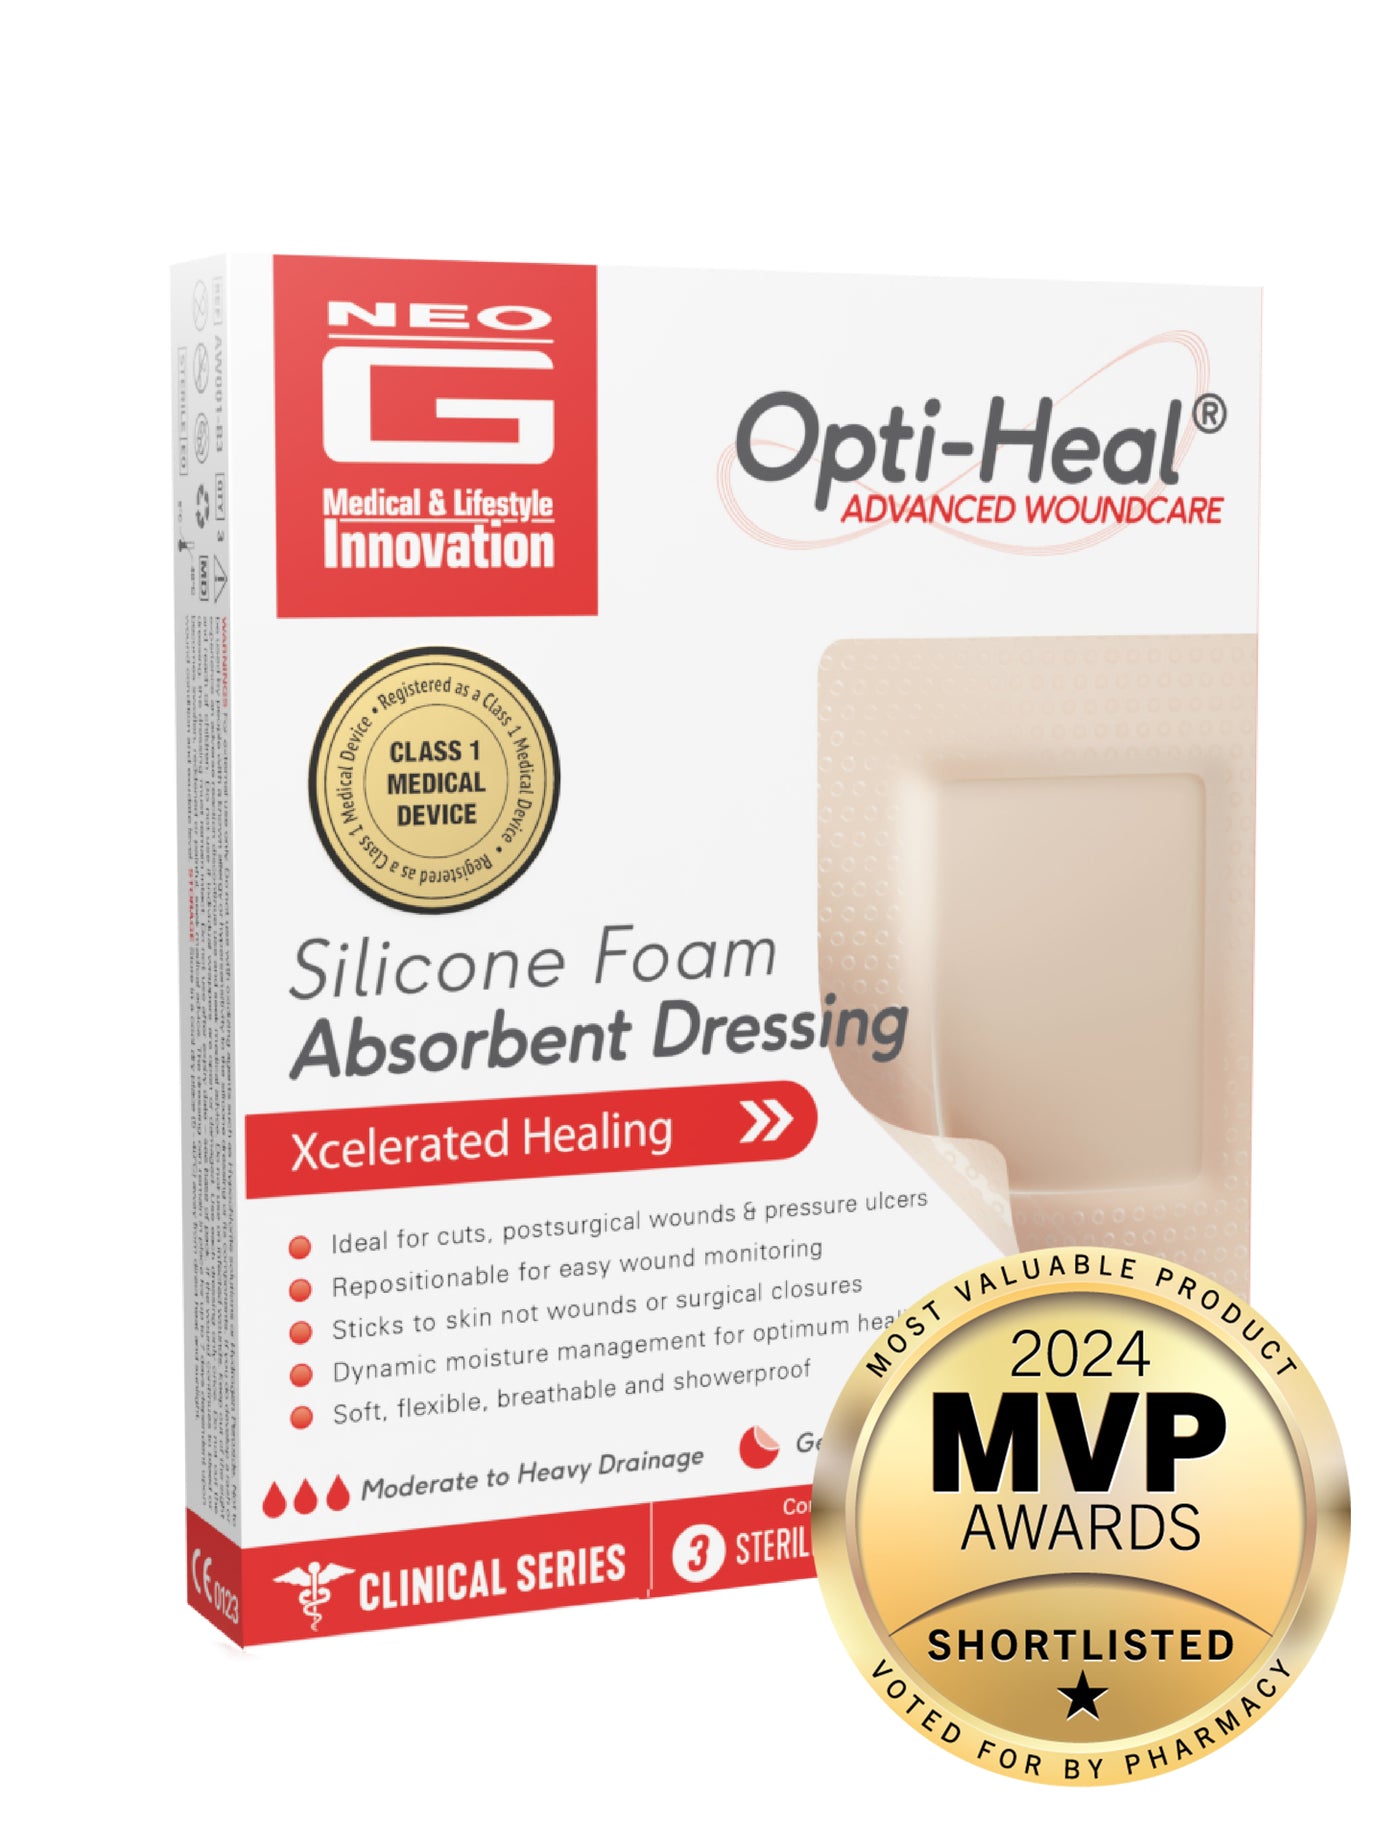 Neo G Silicone Foam Absorbent Dressing box with 2024 MVP Awards Shortlisted Badge